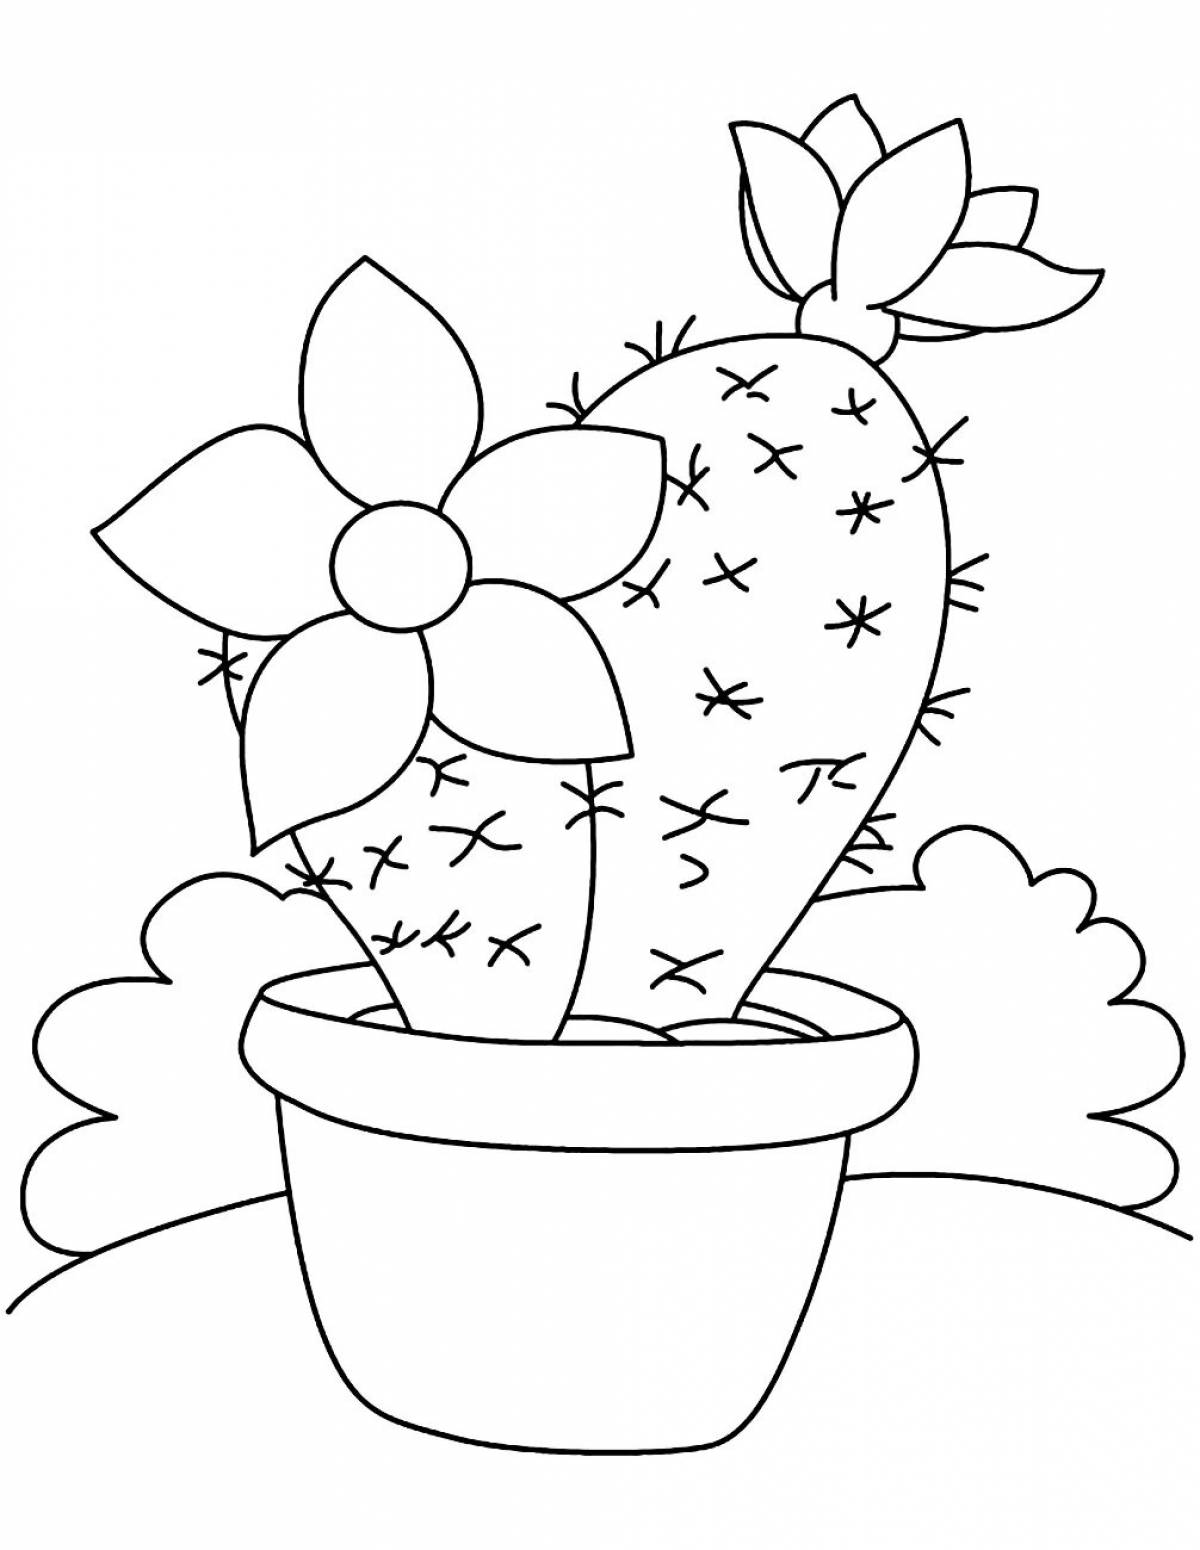 Trendy coloring pages for indoor plants for preschoolers